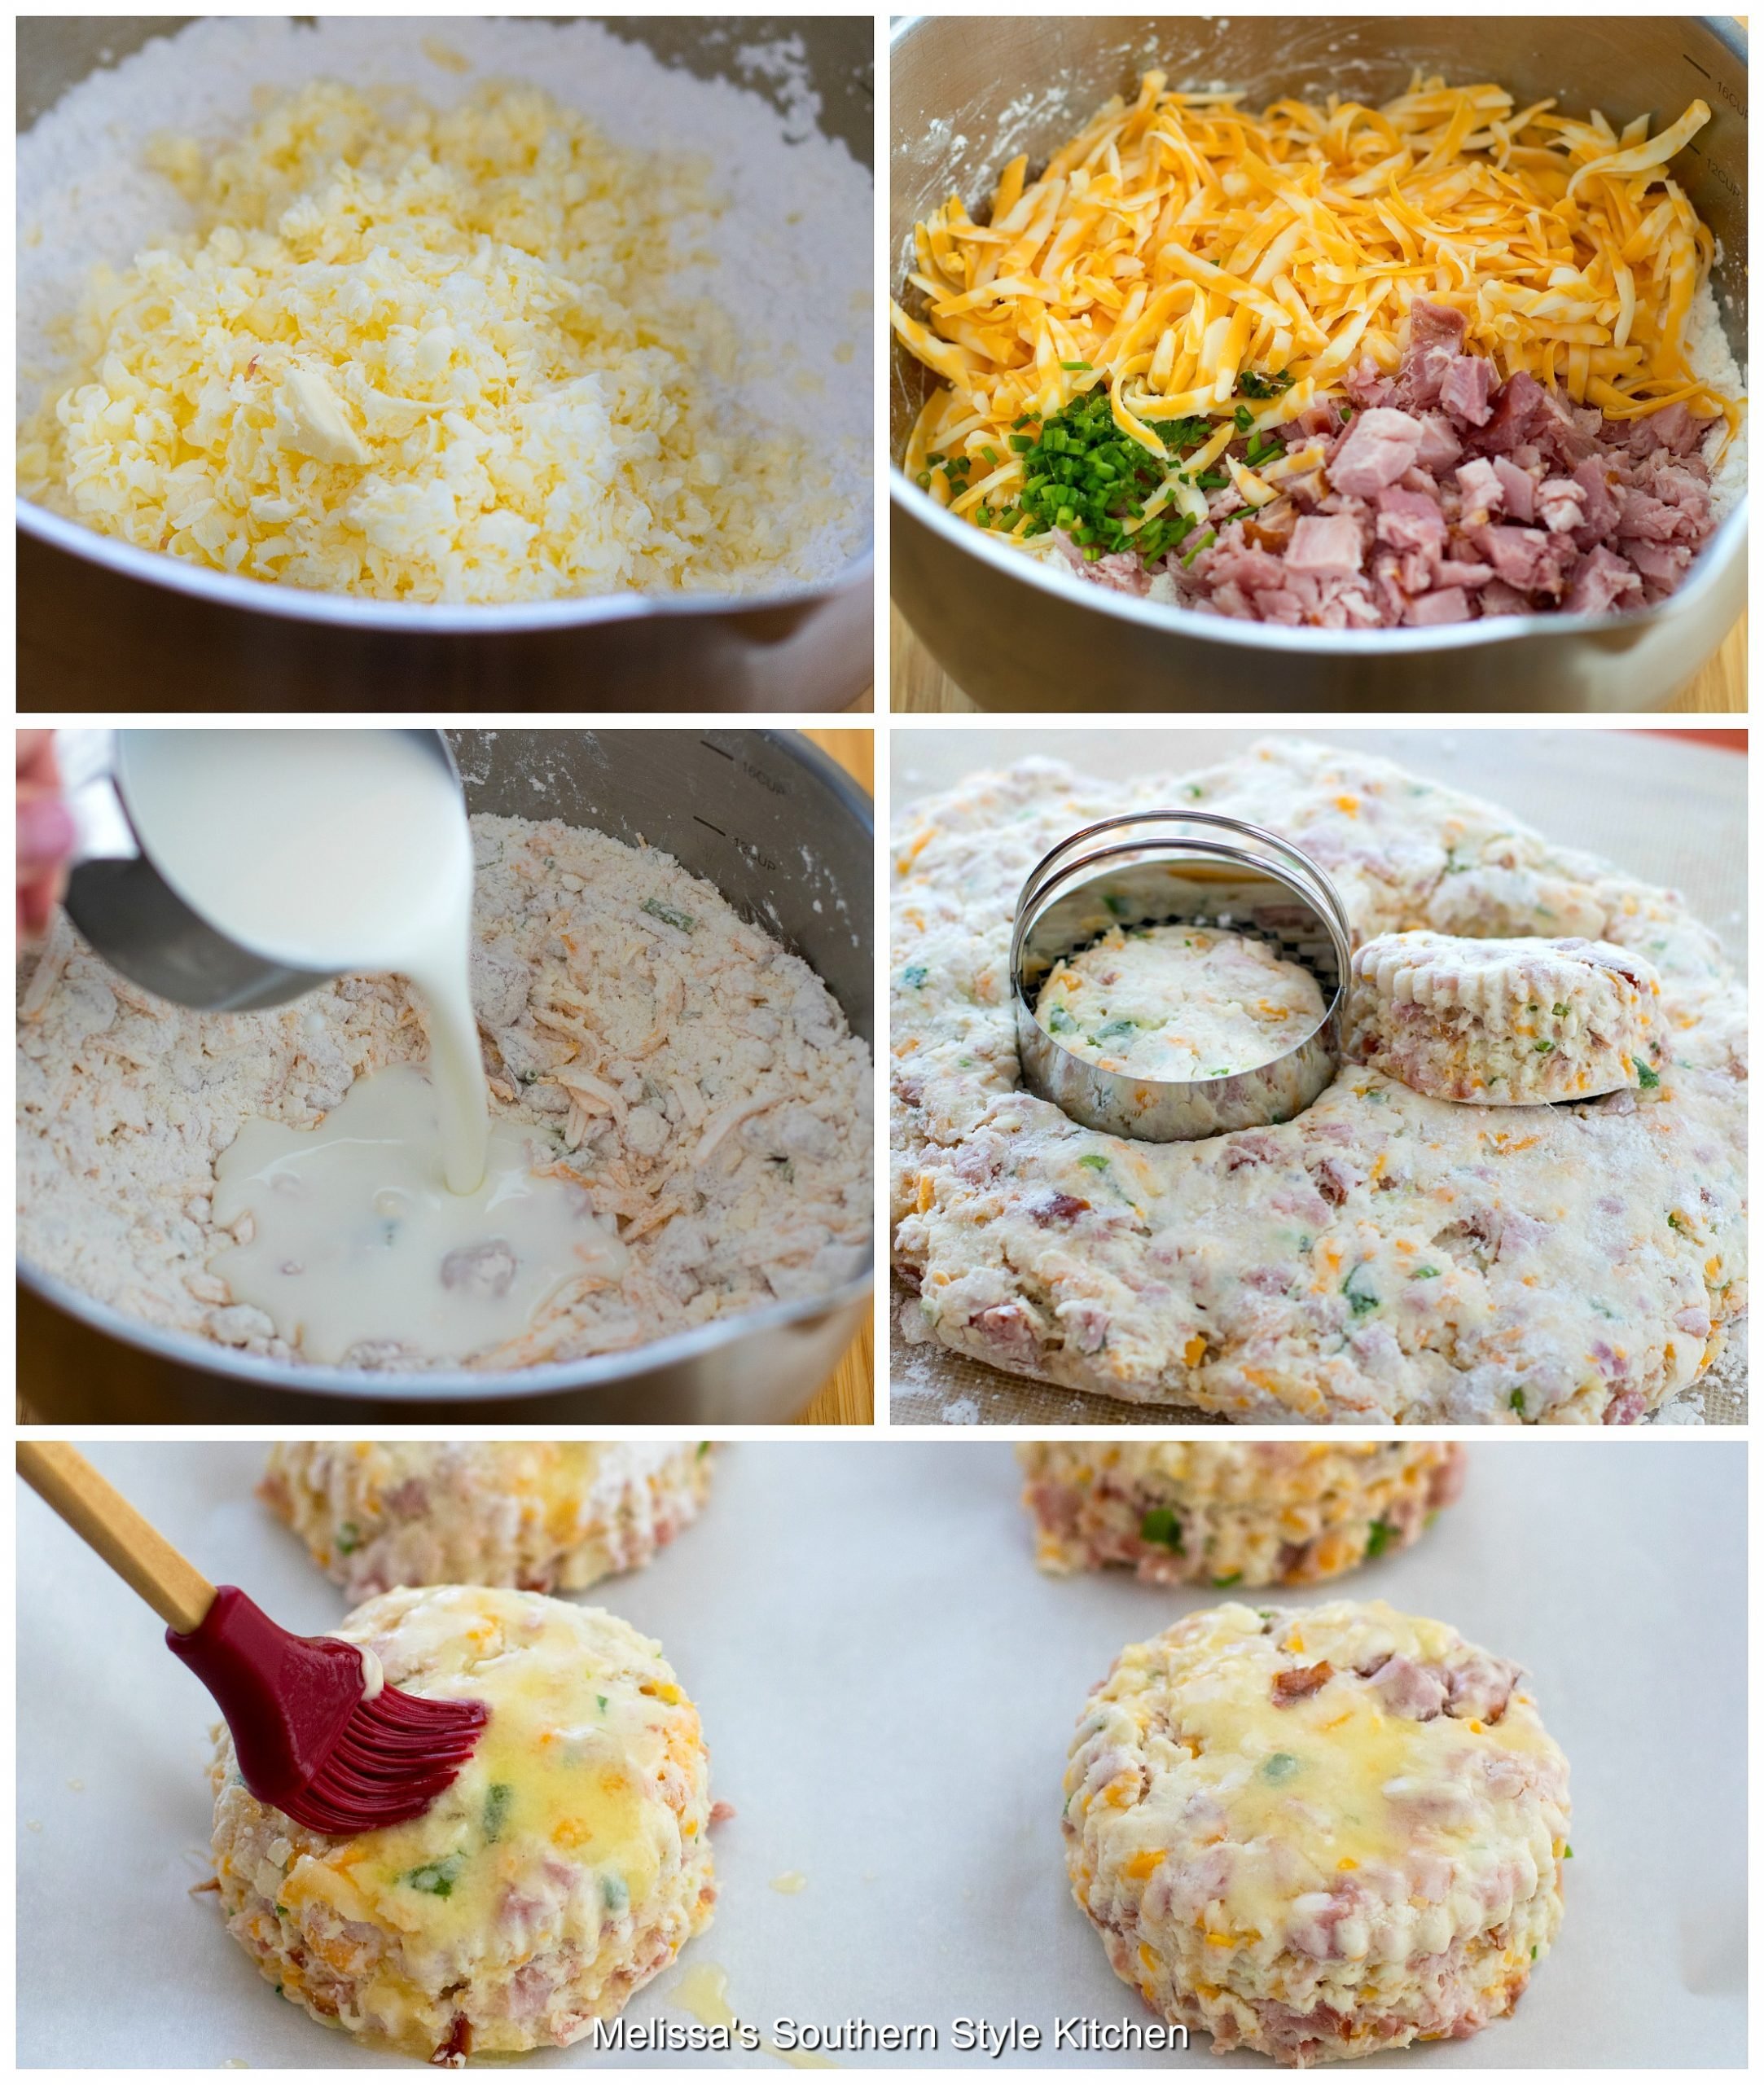 Step-by-step preparation images and ingredients for ham and cheese biscuits